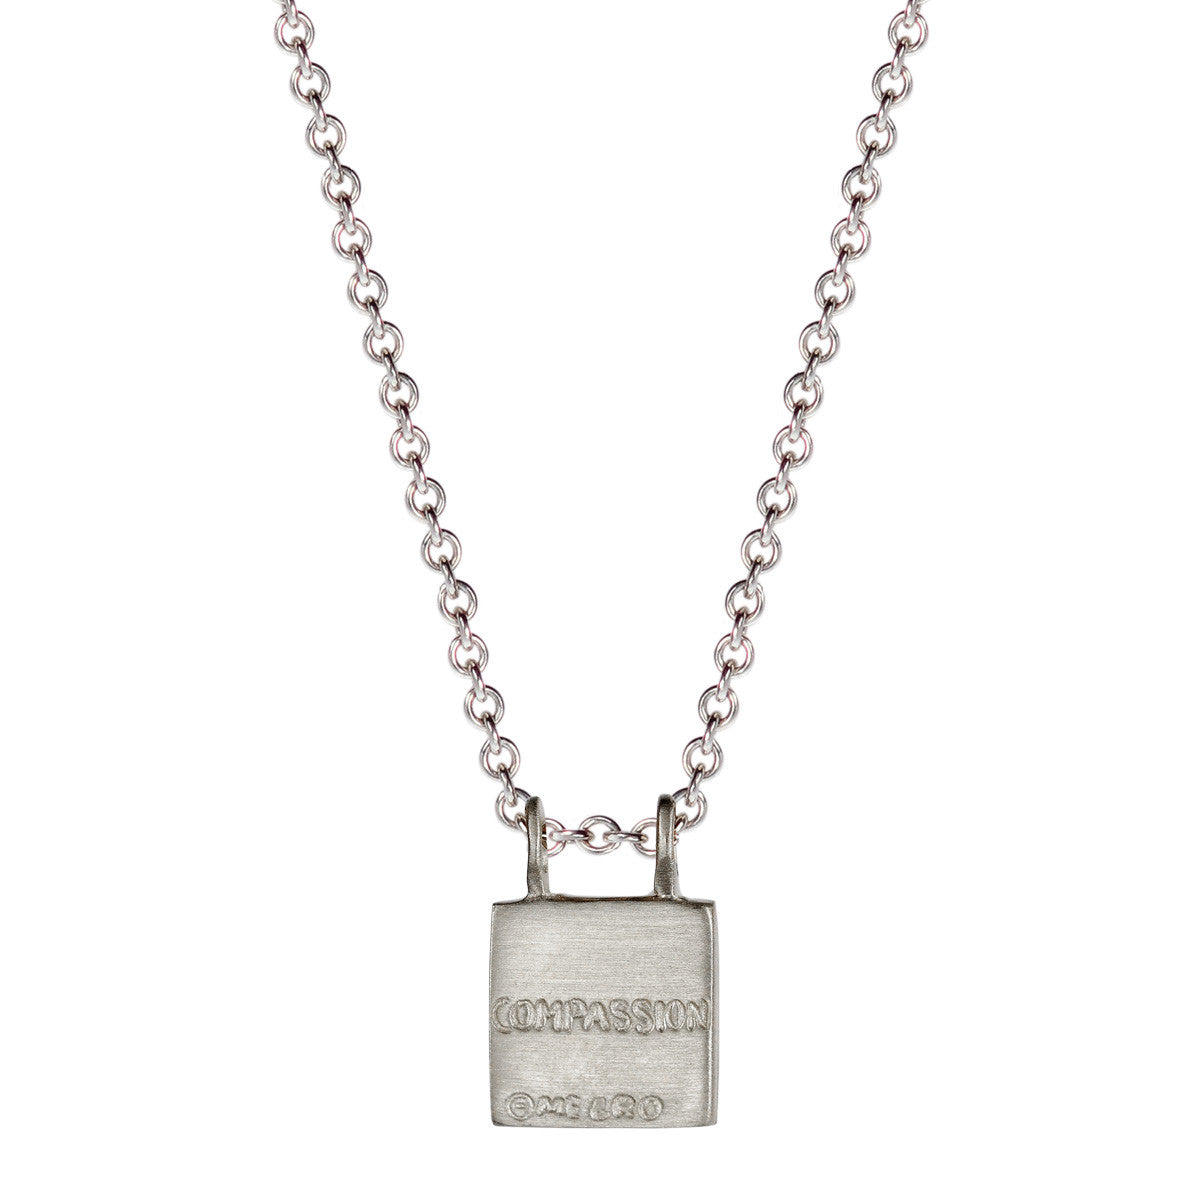 Tiny Lock Necklace Sterling Silver